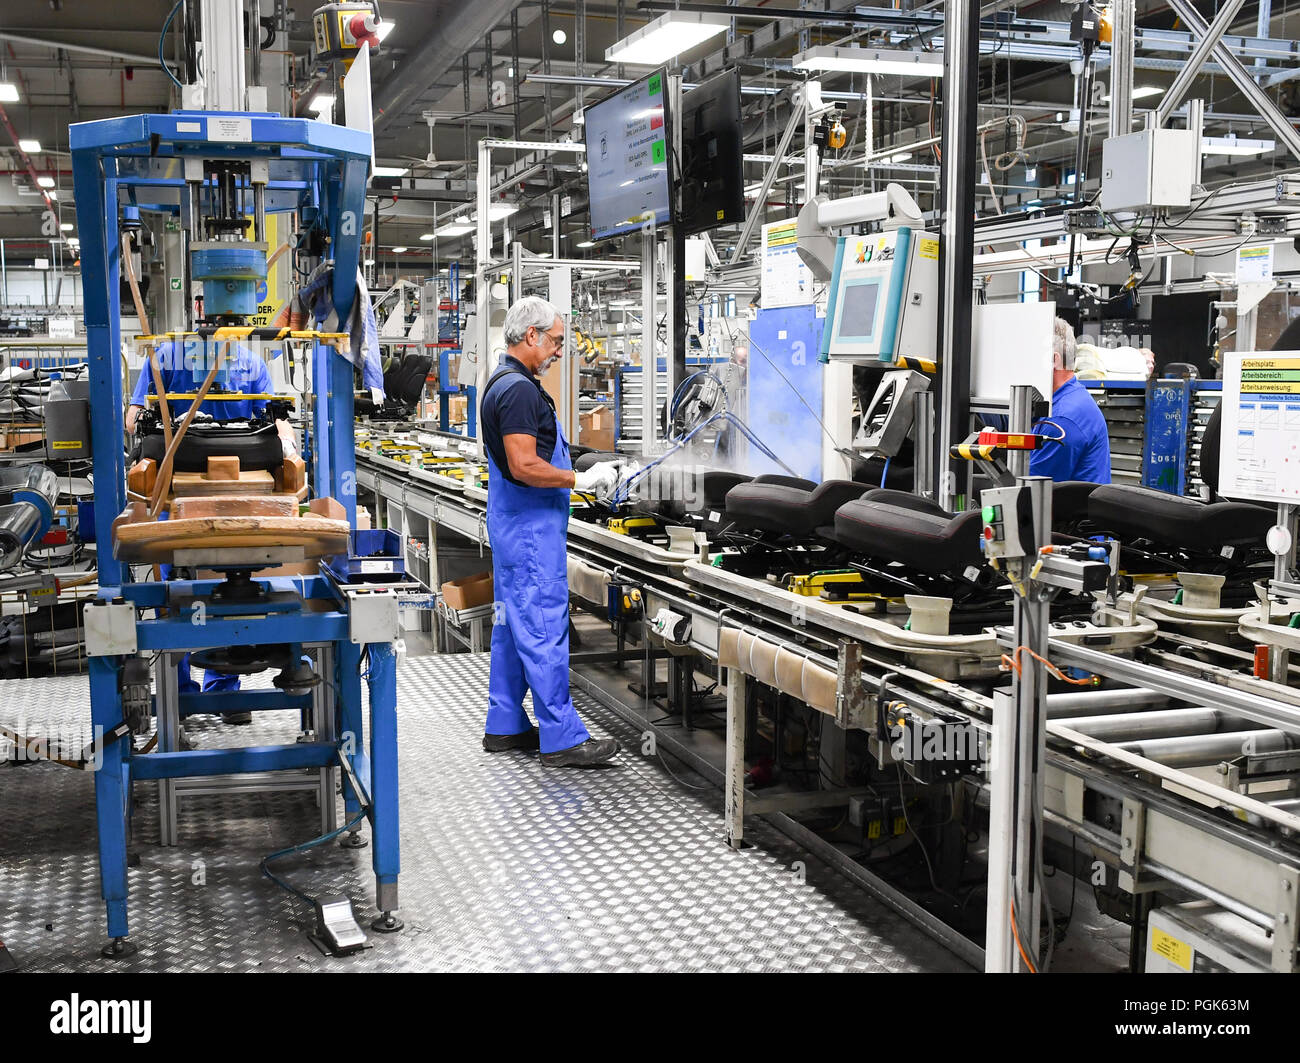 27-augus6t-2018-germany-eisenach-workers-manufacture-car-seats-in-the-automotive-supplier